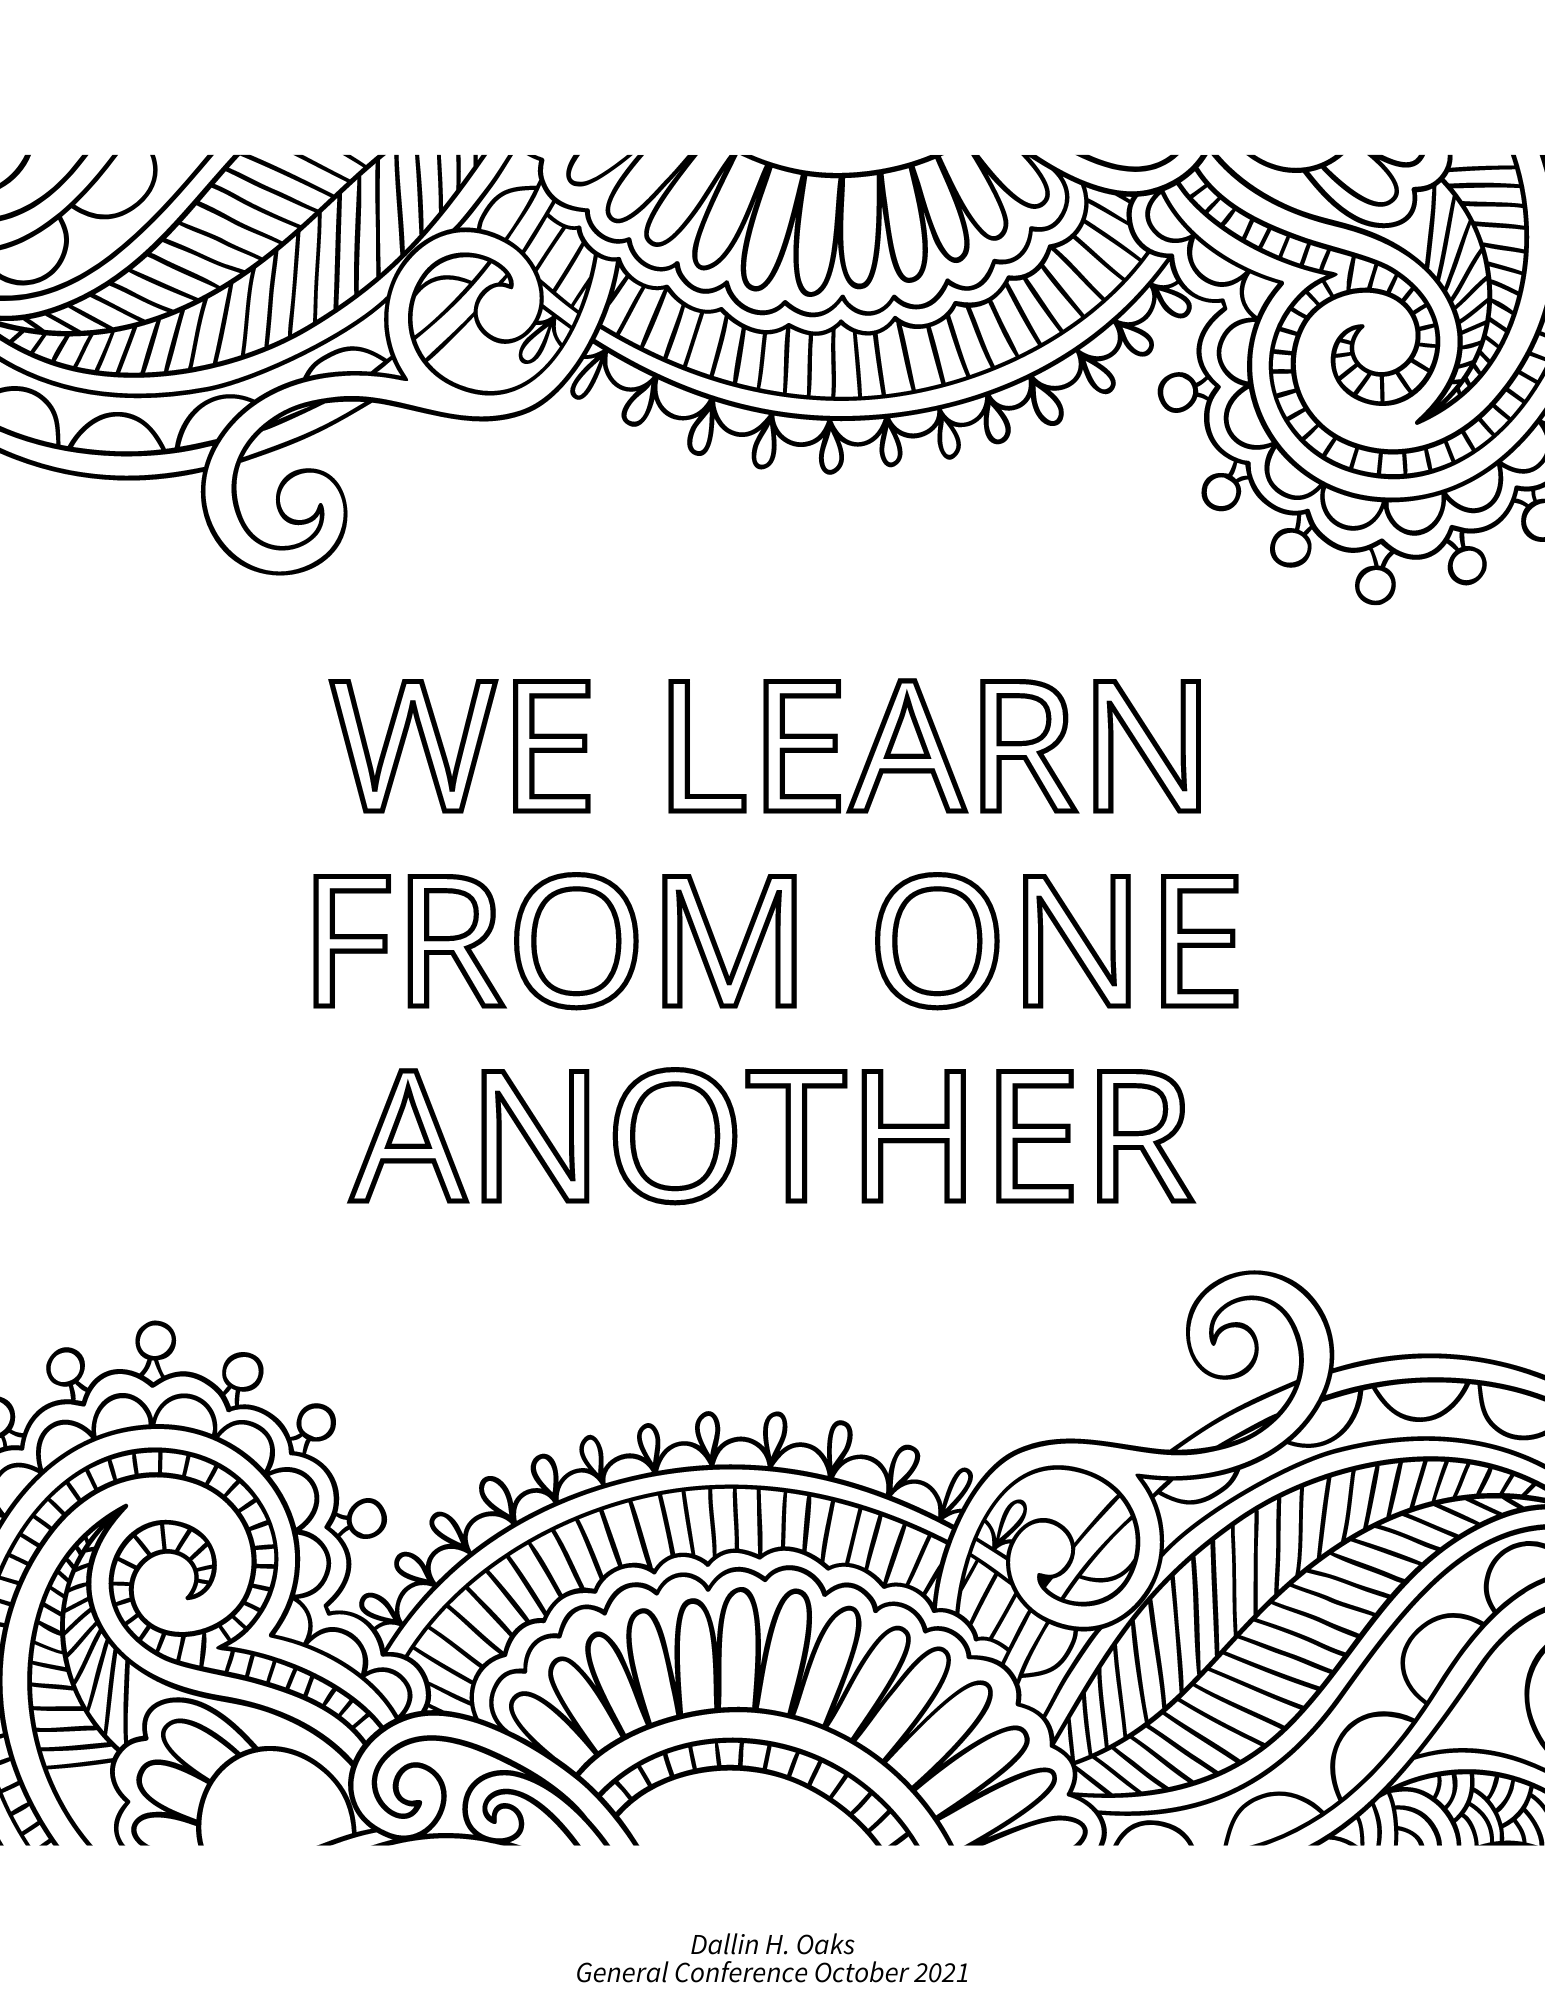 general conference quotes, we learn from one another, dallin h oaks october 2021 general conference quote, free printable coloring page